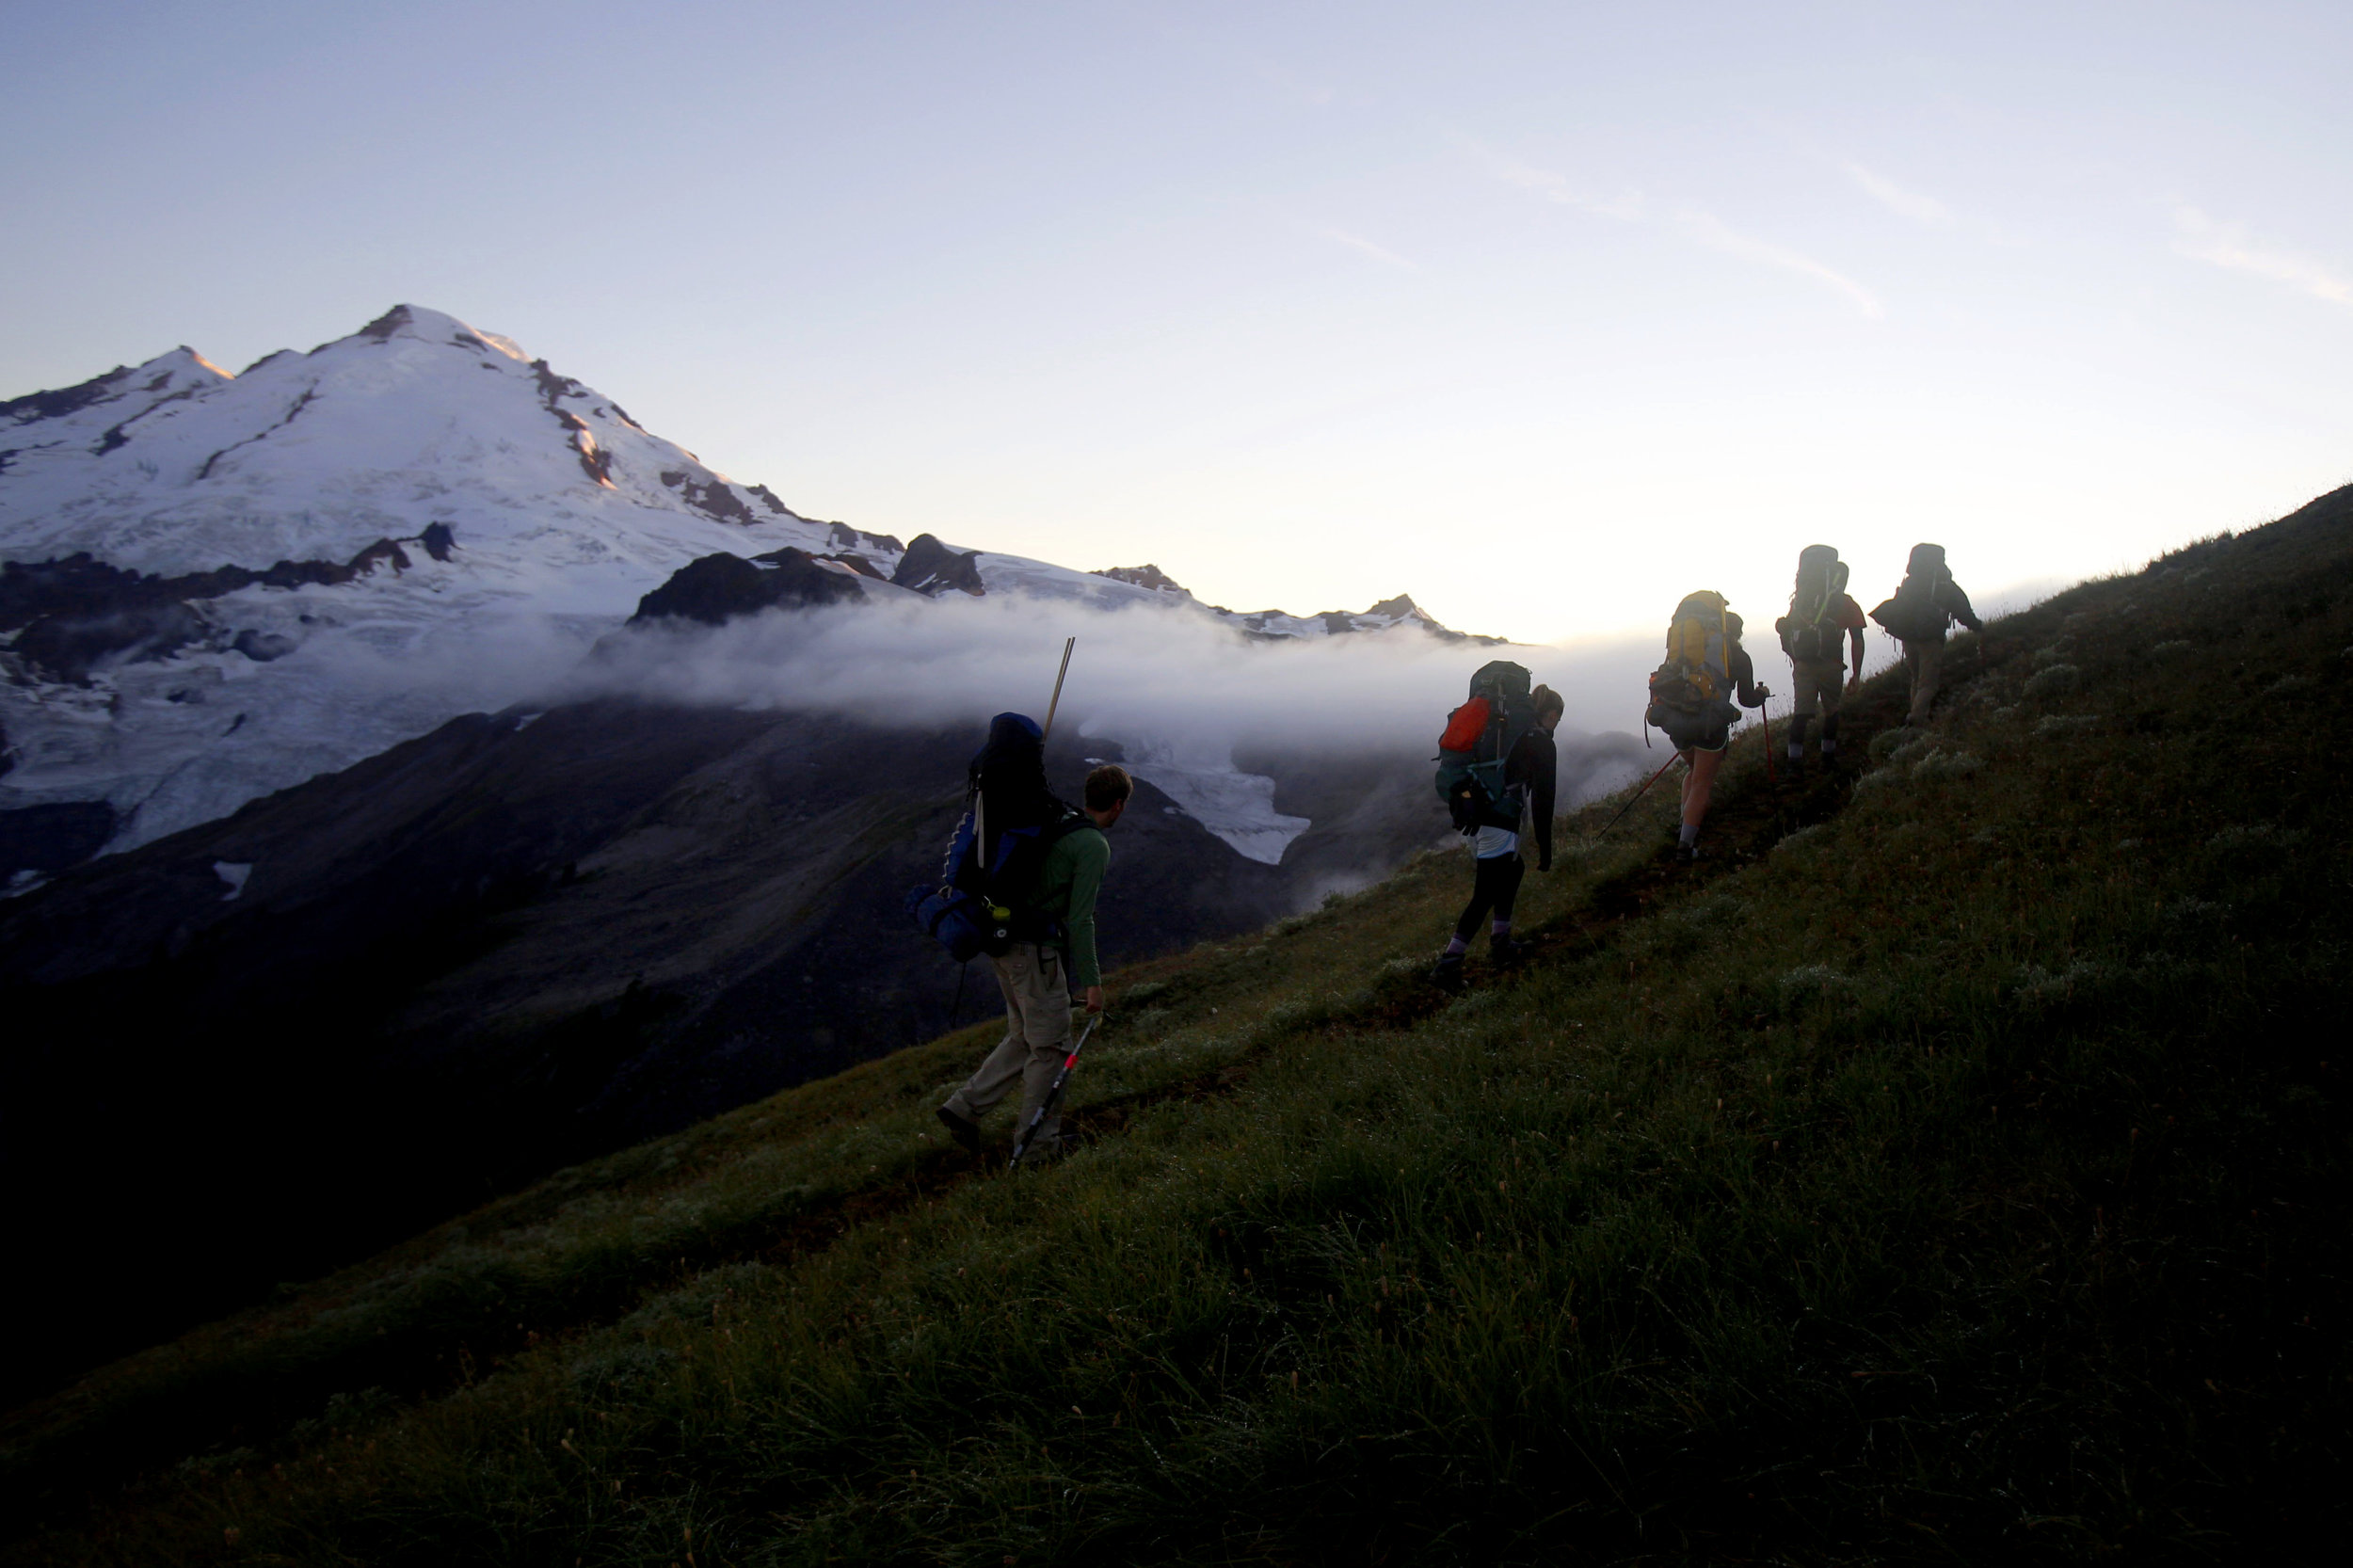  The research team heads toward a campsite as Mount Baker catches the last of the day’s light on Thursday, Aug. 6, 2015. This is Pelto’s 32nd year collecting data on Sholes Glacier.     